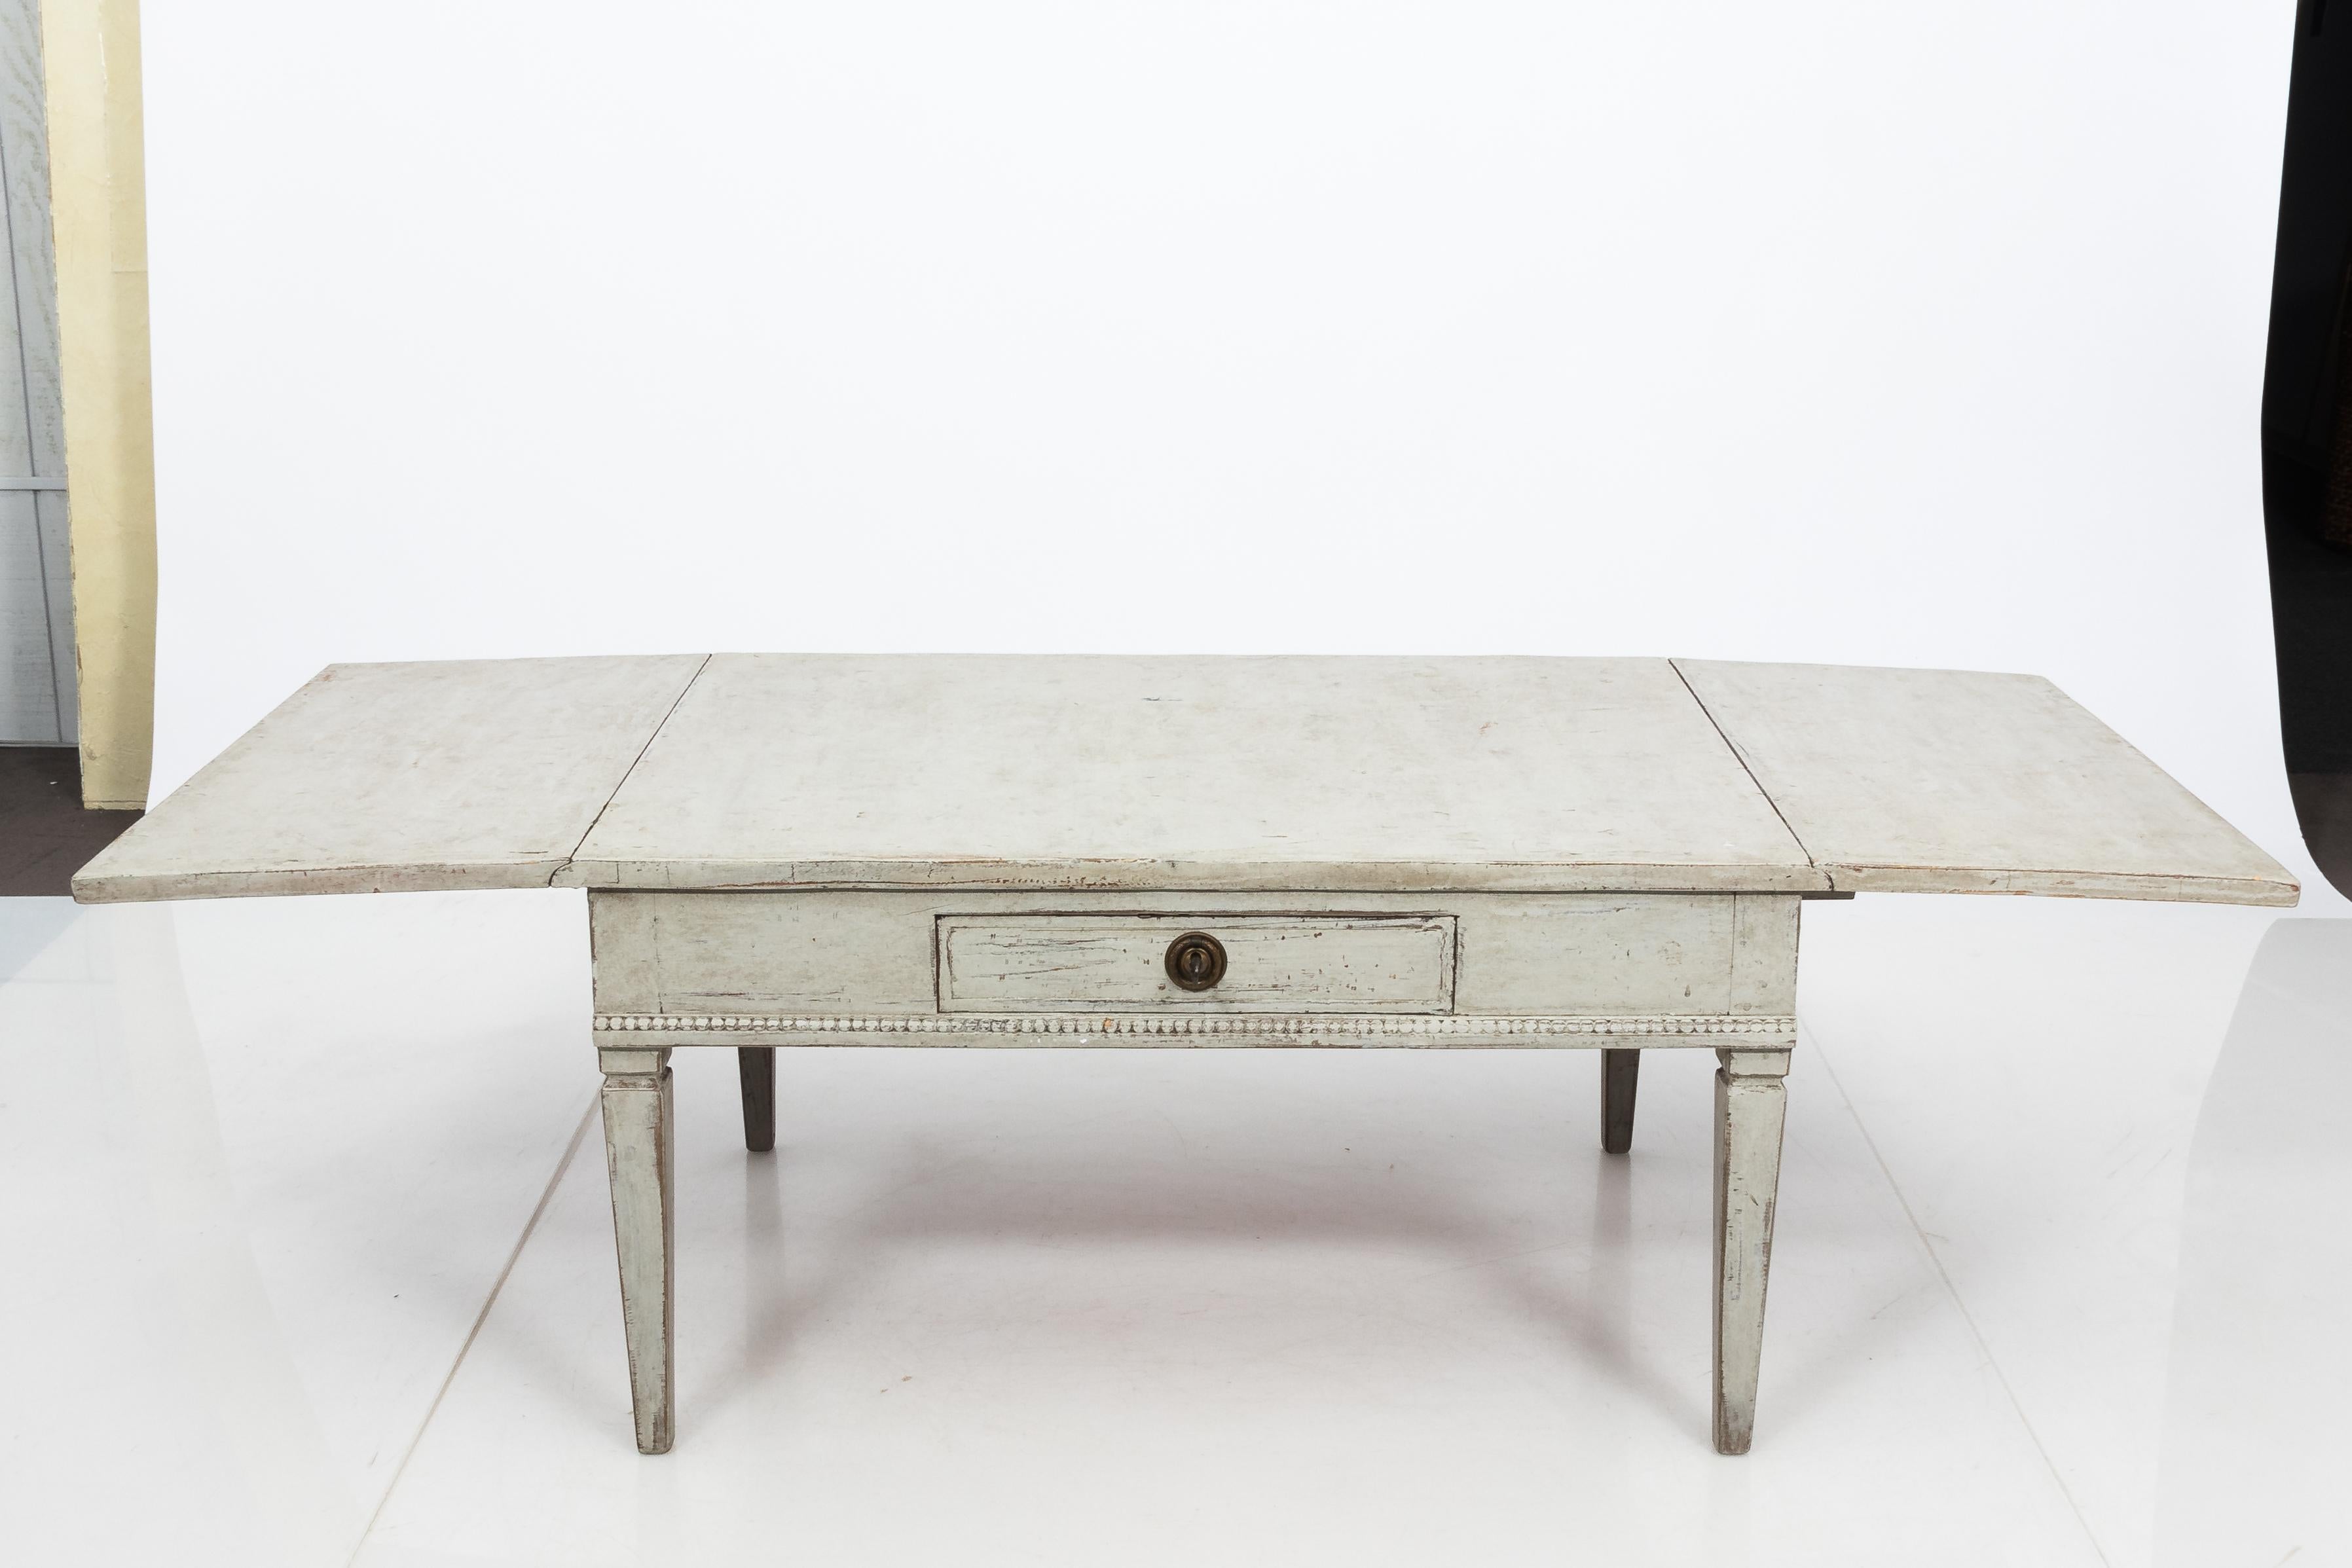 Unique Gustavian Style coffee table with drop leaves, made in Sweden circa 1850. The table is painted white with lovely patina from age. Decorated simply with beaded trim and sits on plain tapered legs. This versatile piece was likely a dining table